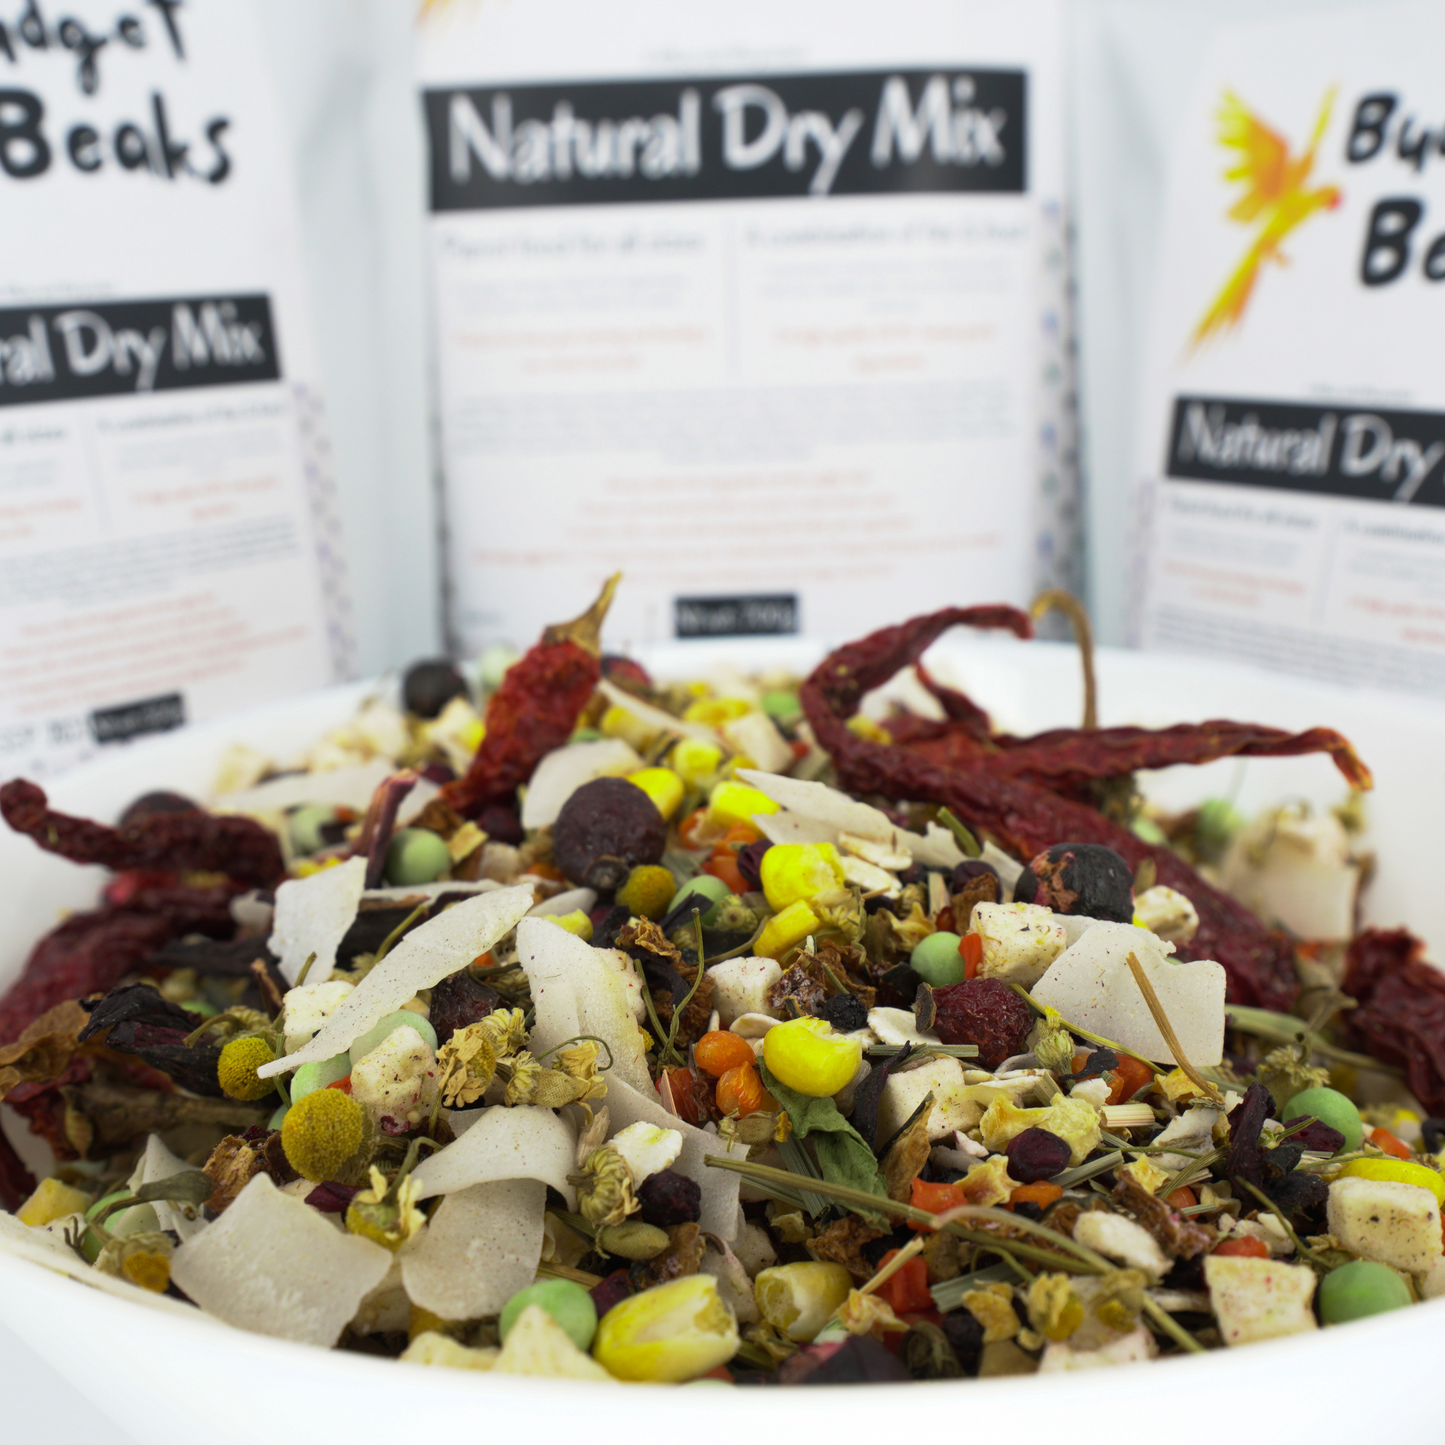 Budget Beaks Dry Mix - Healthy parrot food